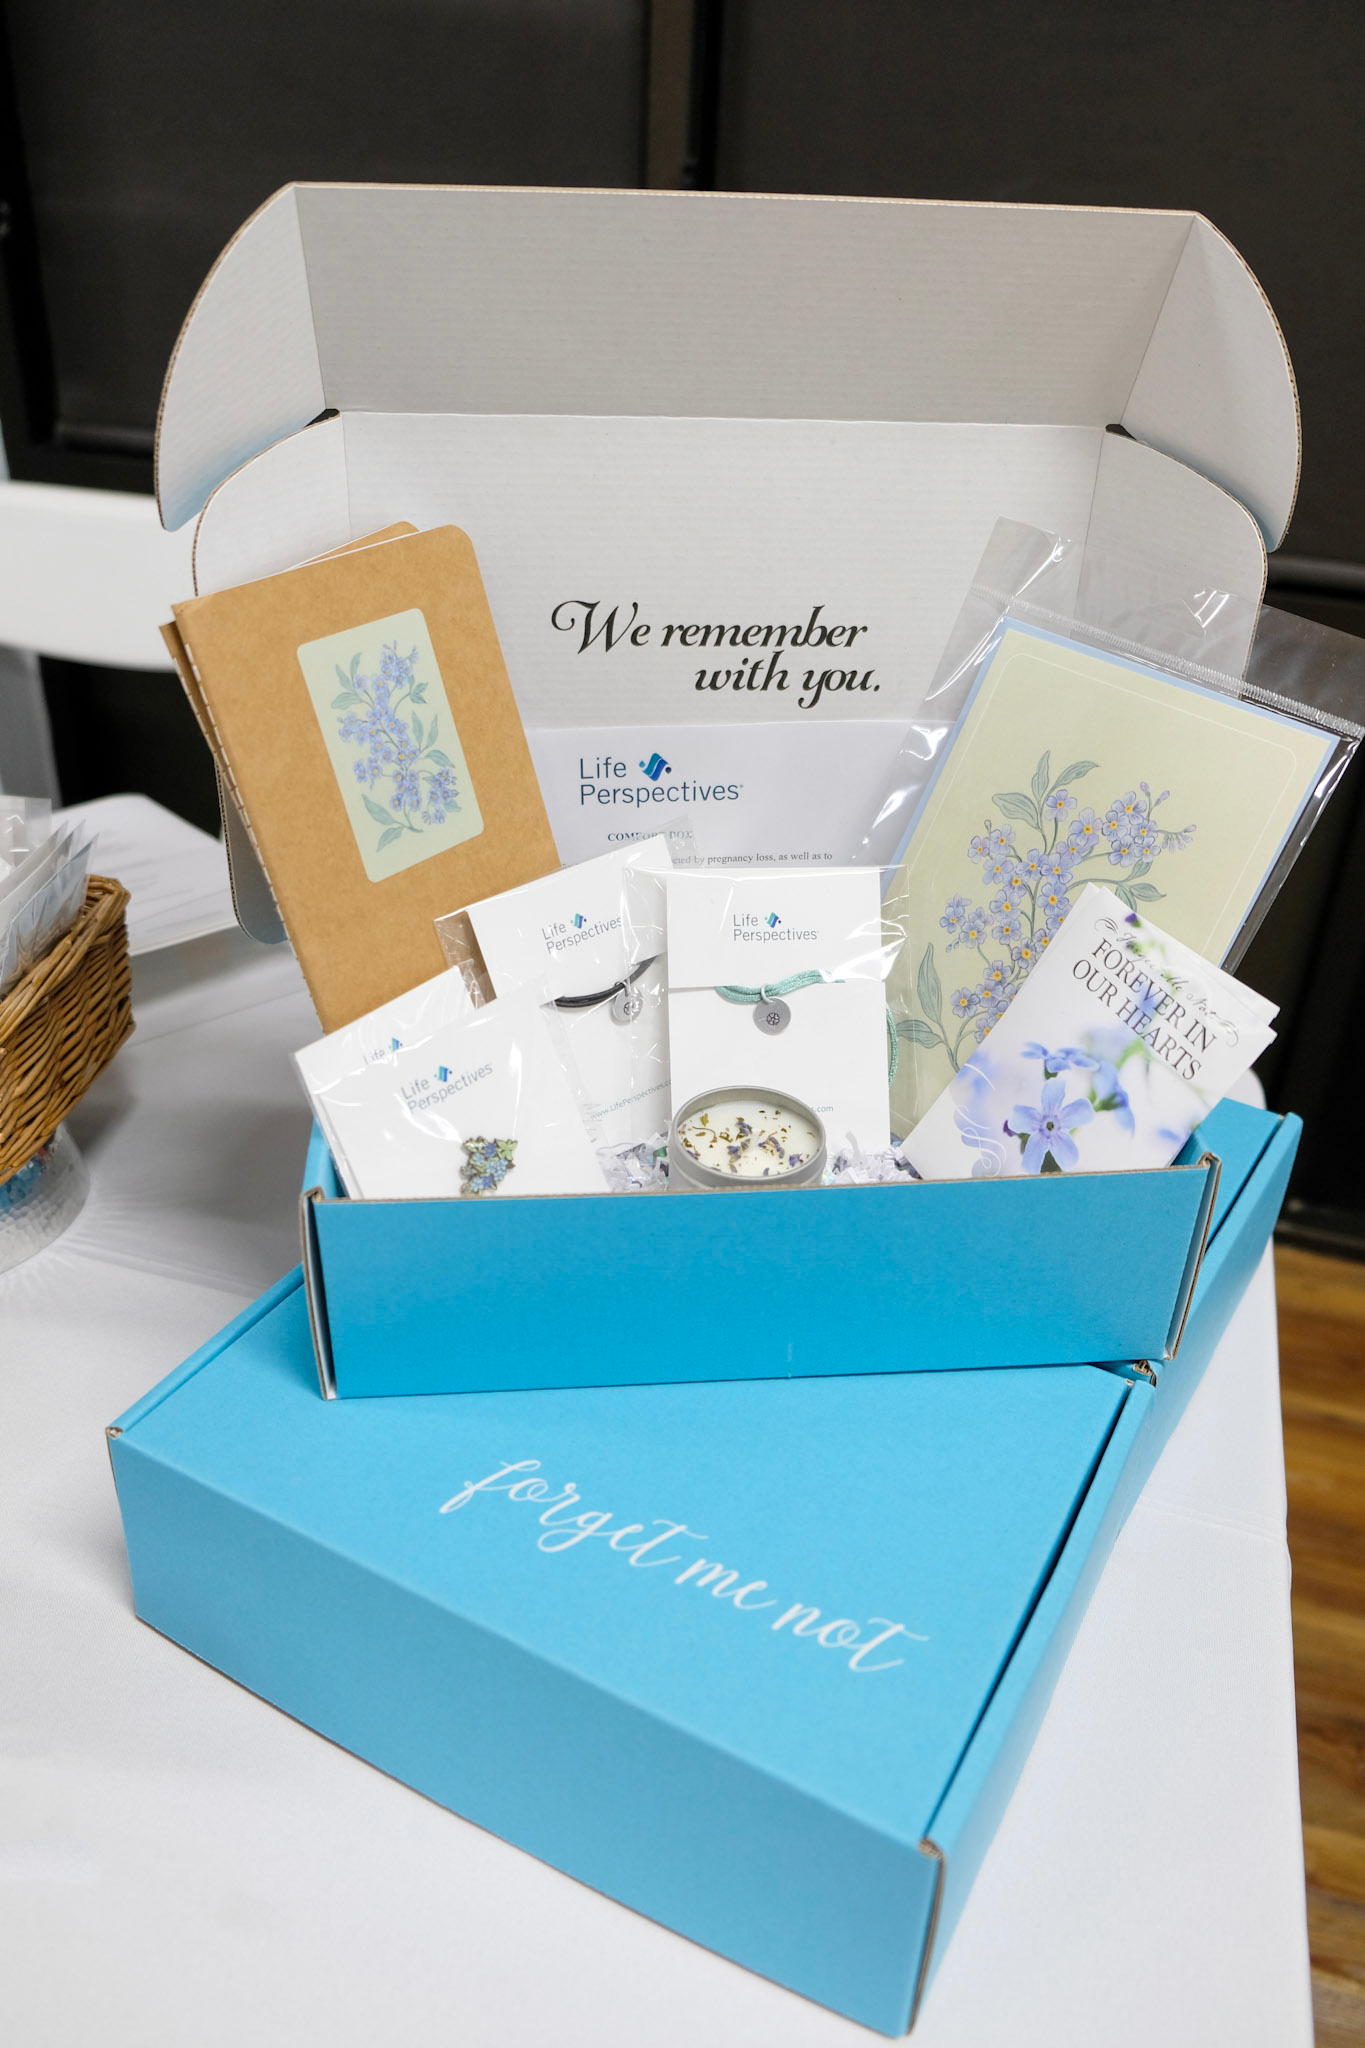 Comfort Box by Reproductive Grief details